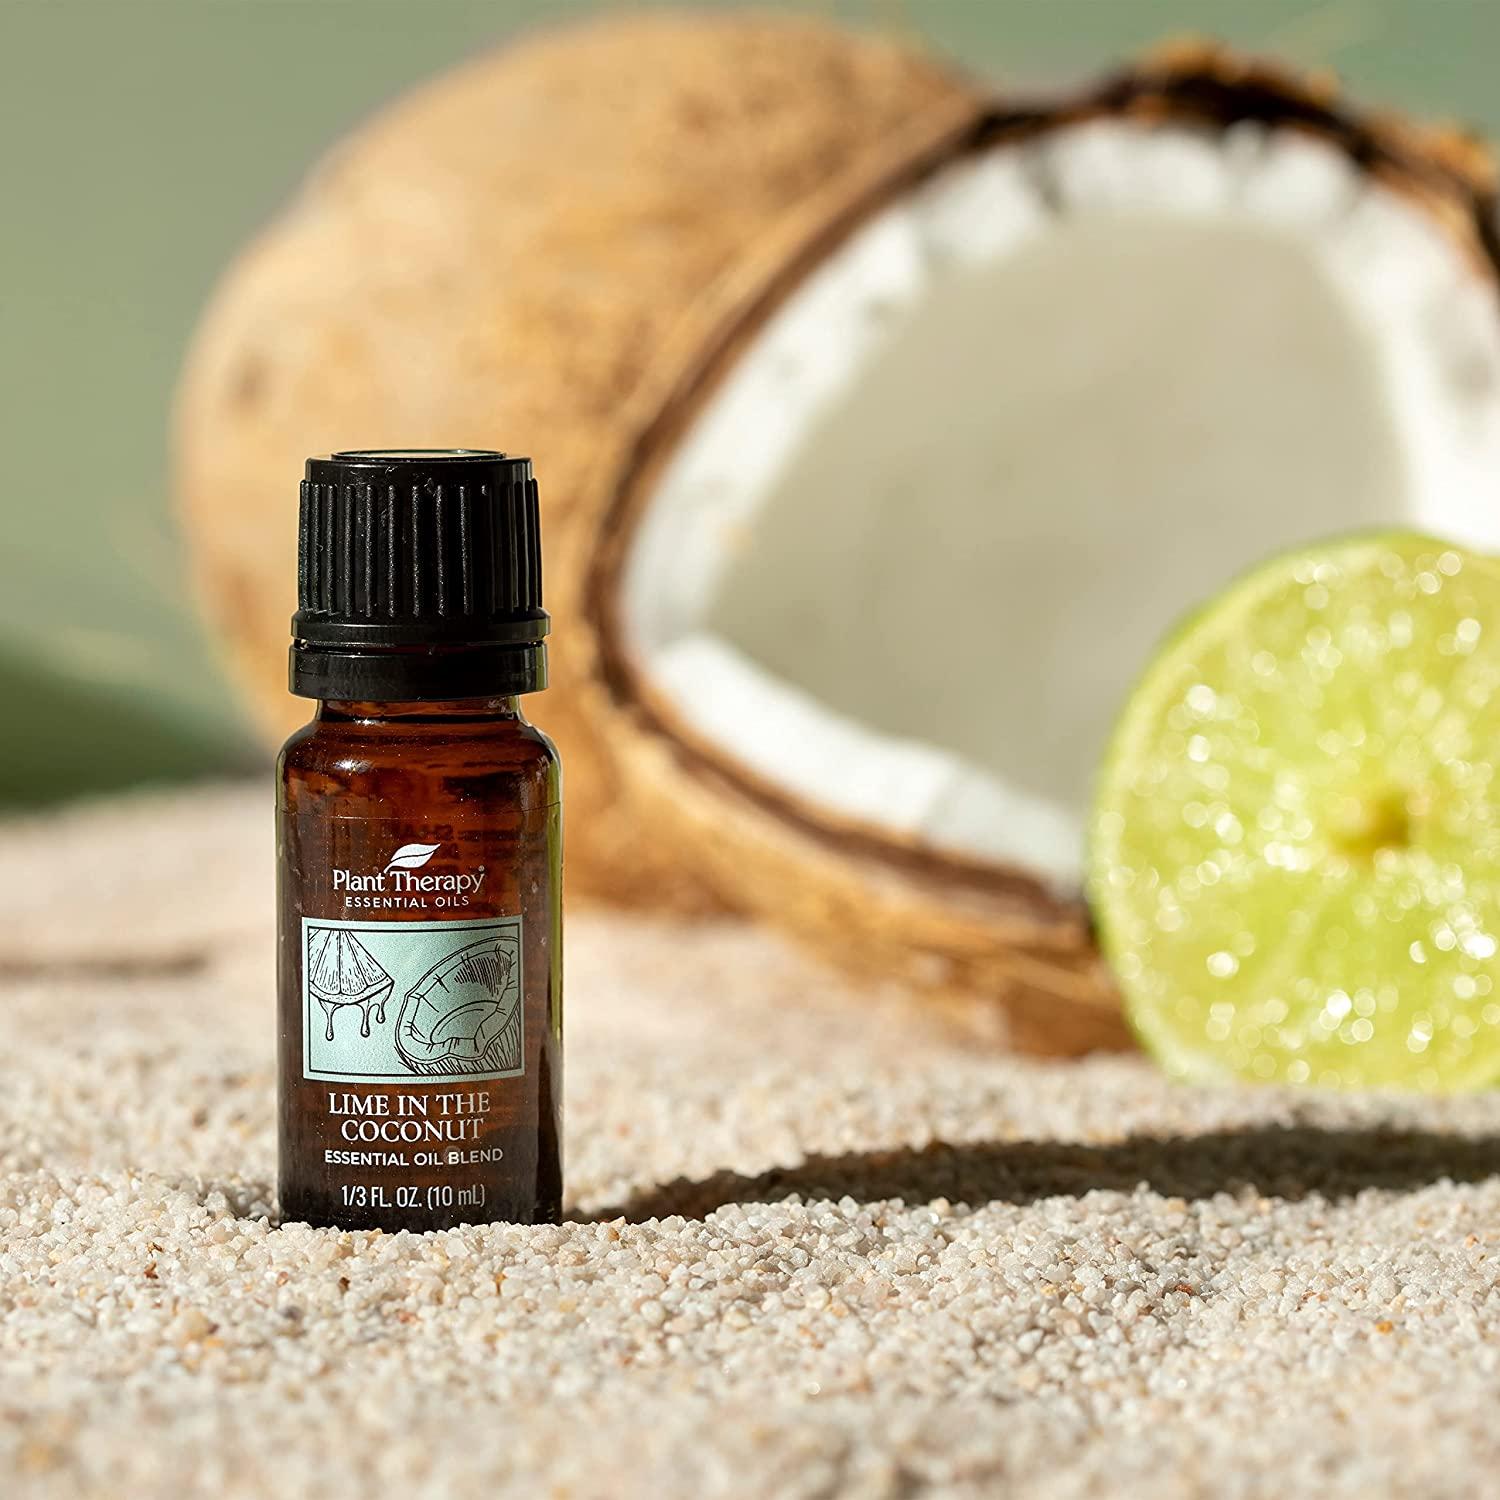 Plant Therapy Lime in The Coconut Essential Oil Blend 10 mL (1/3